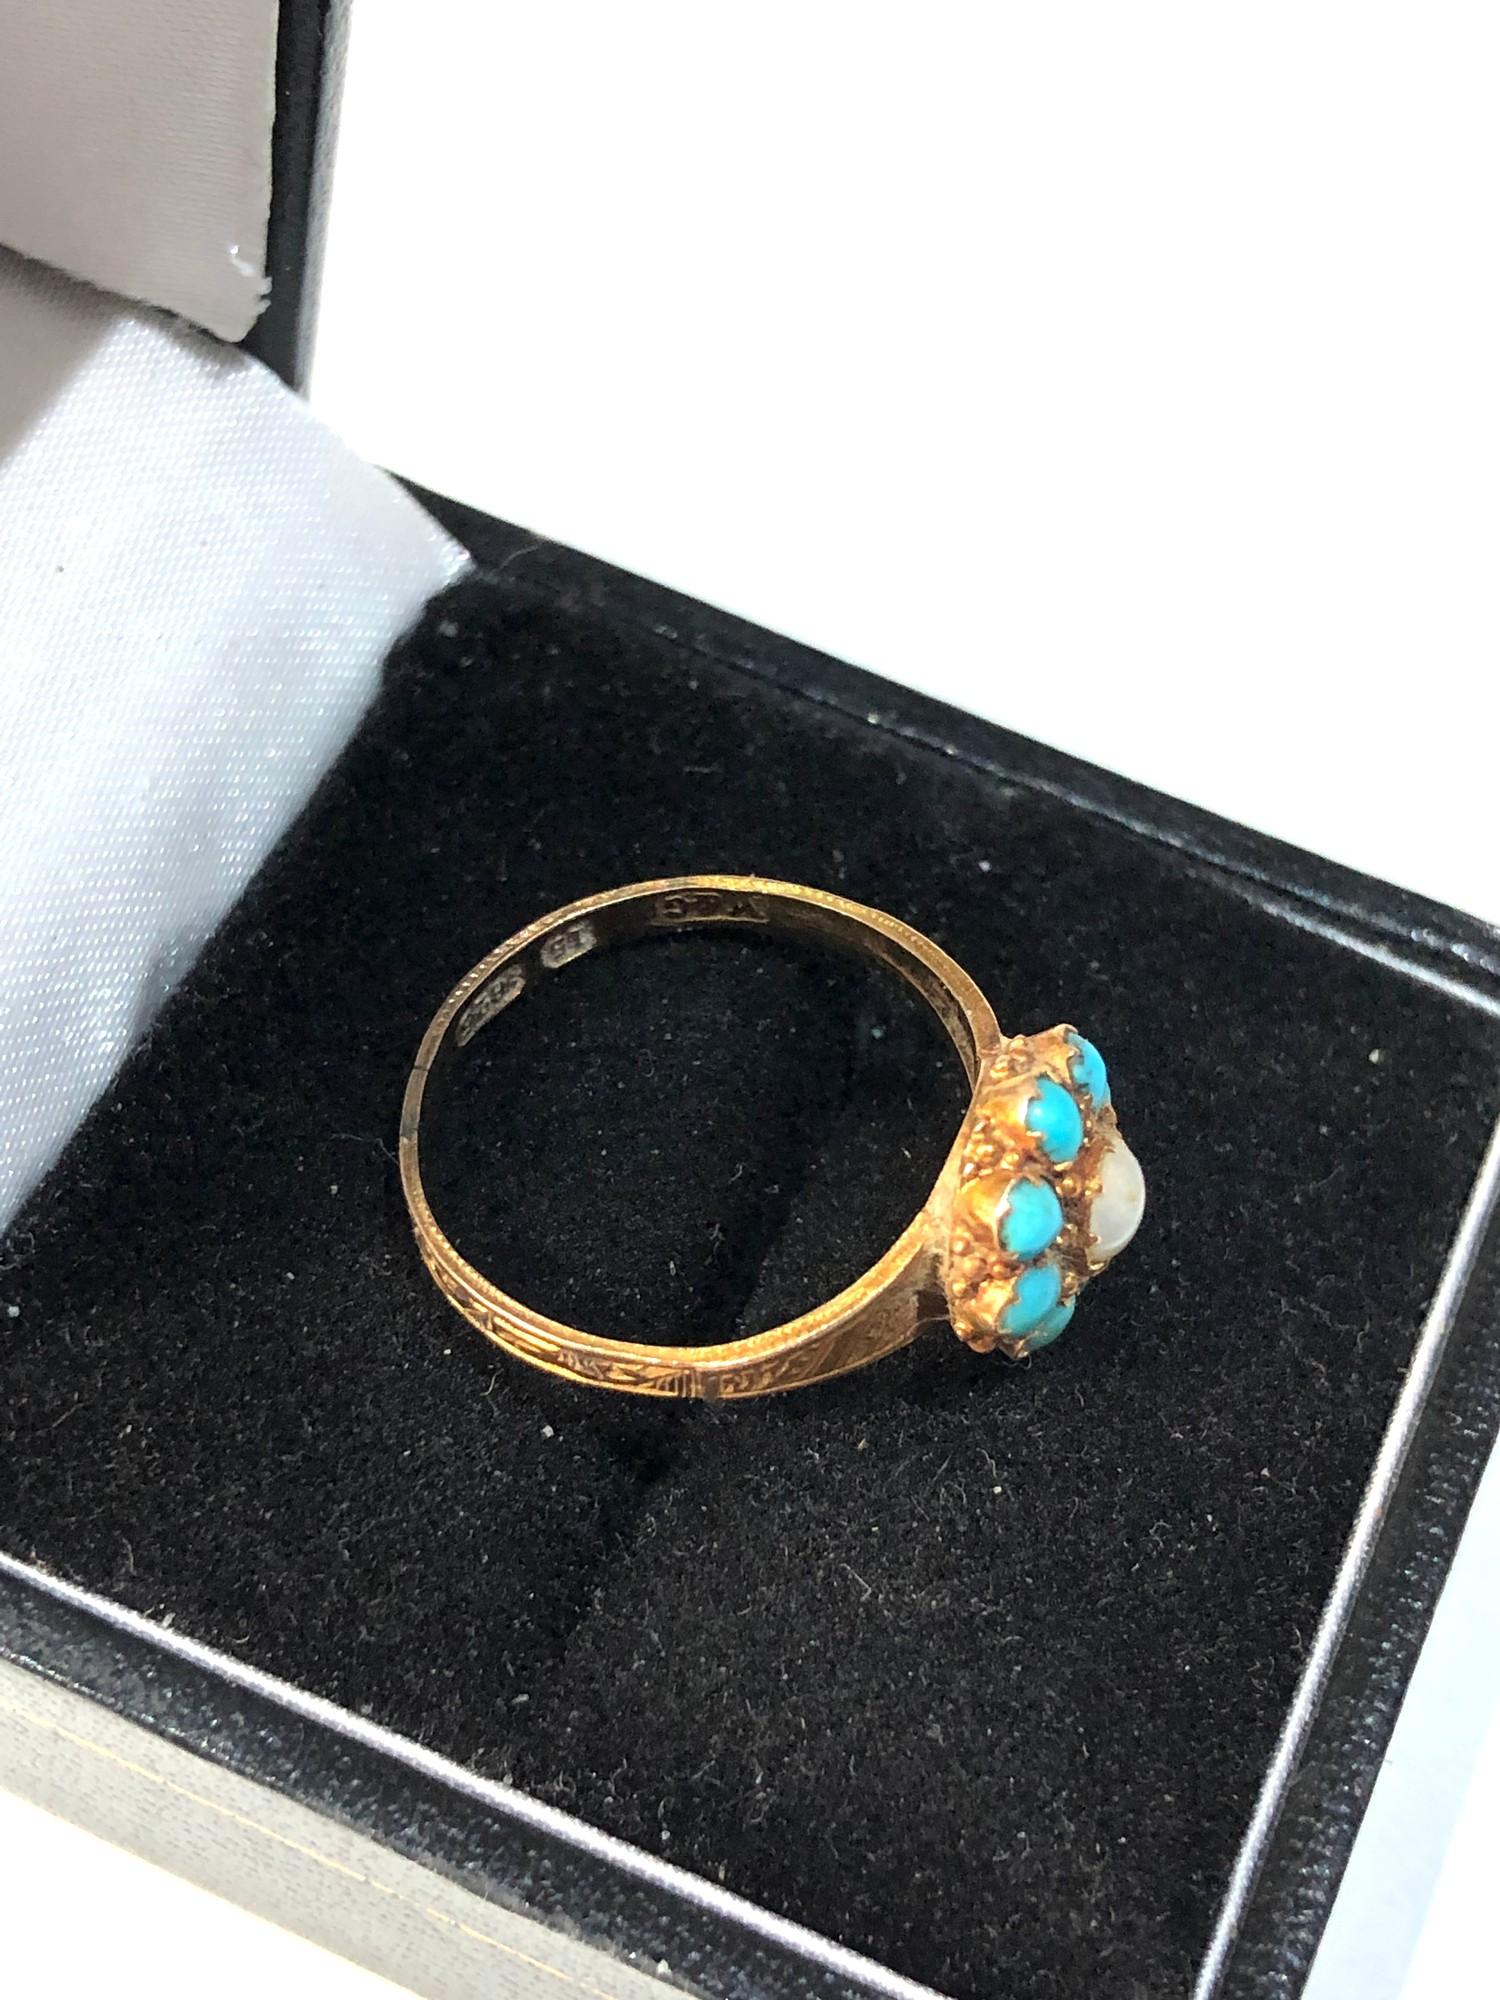 15ct gold antique turquoise and pearl ring weight 2g - Image 3 of 5